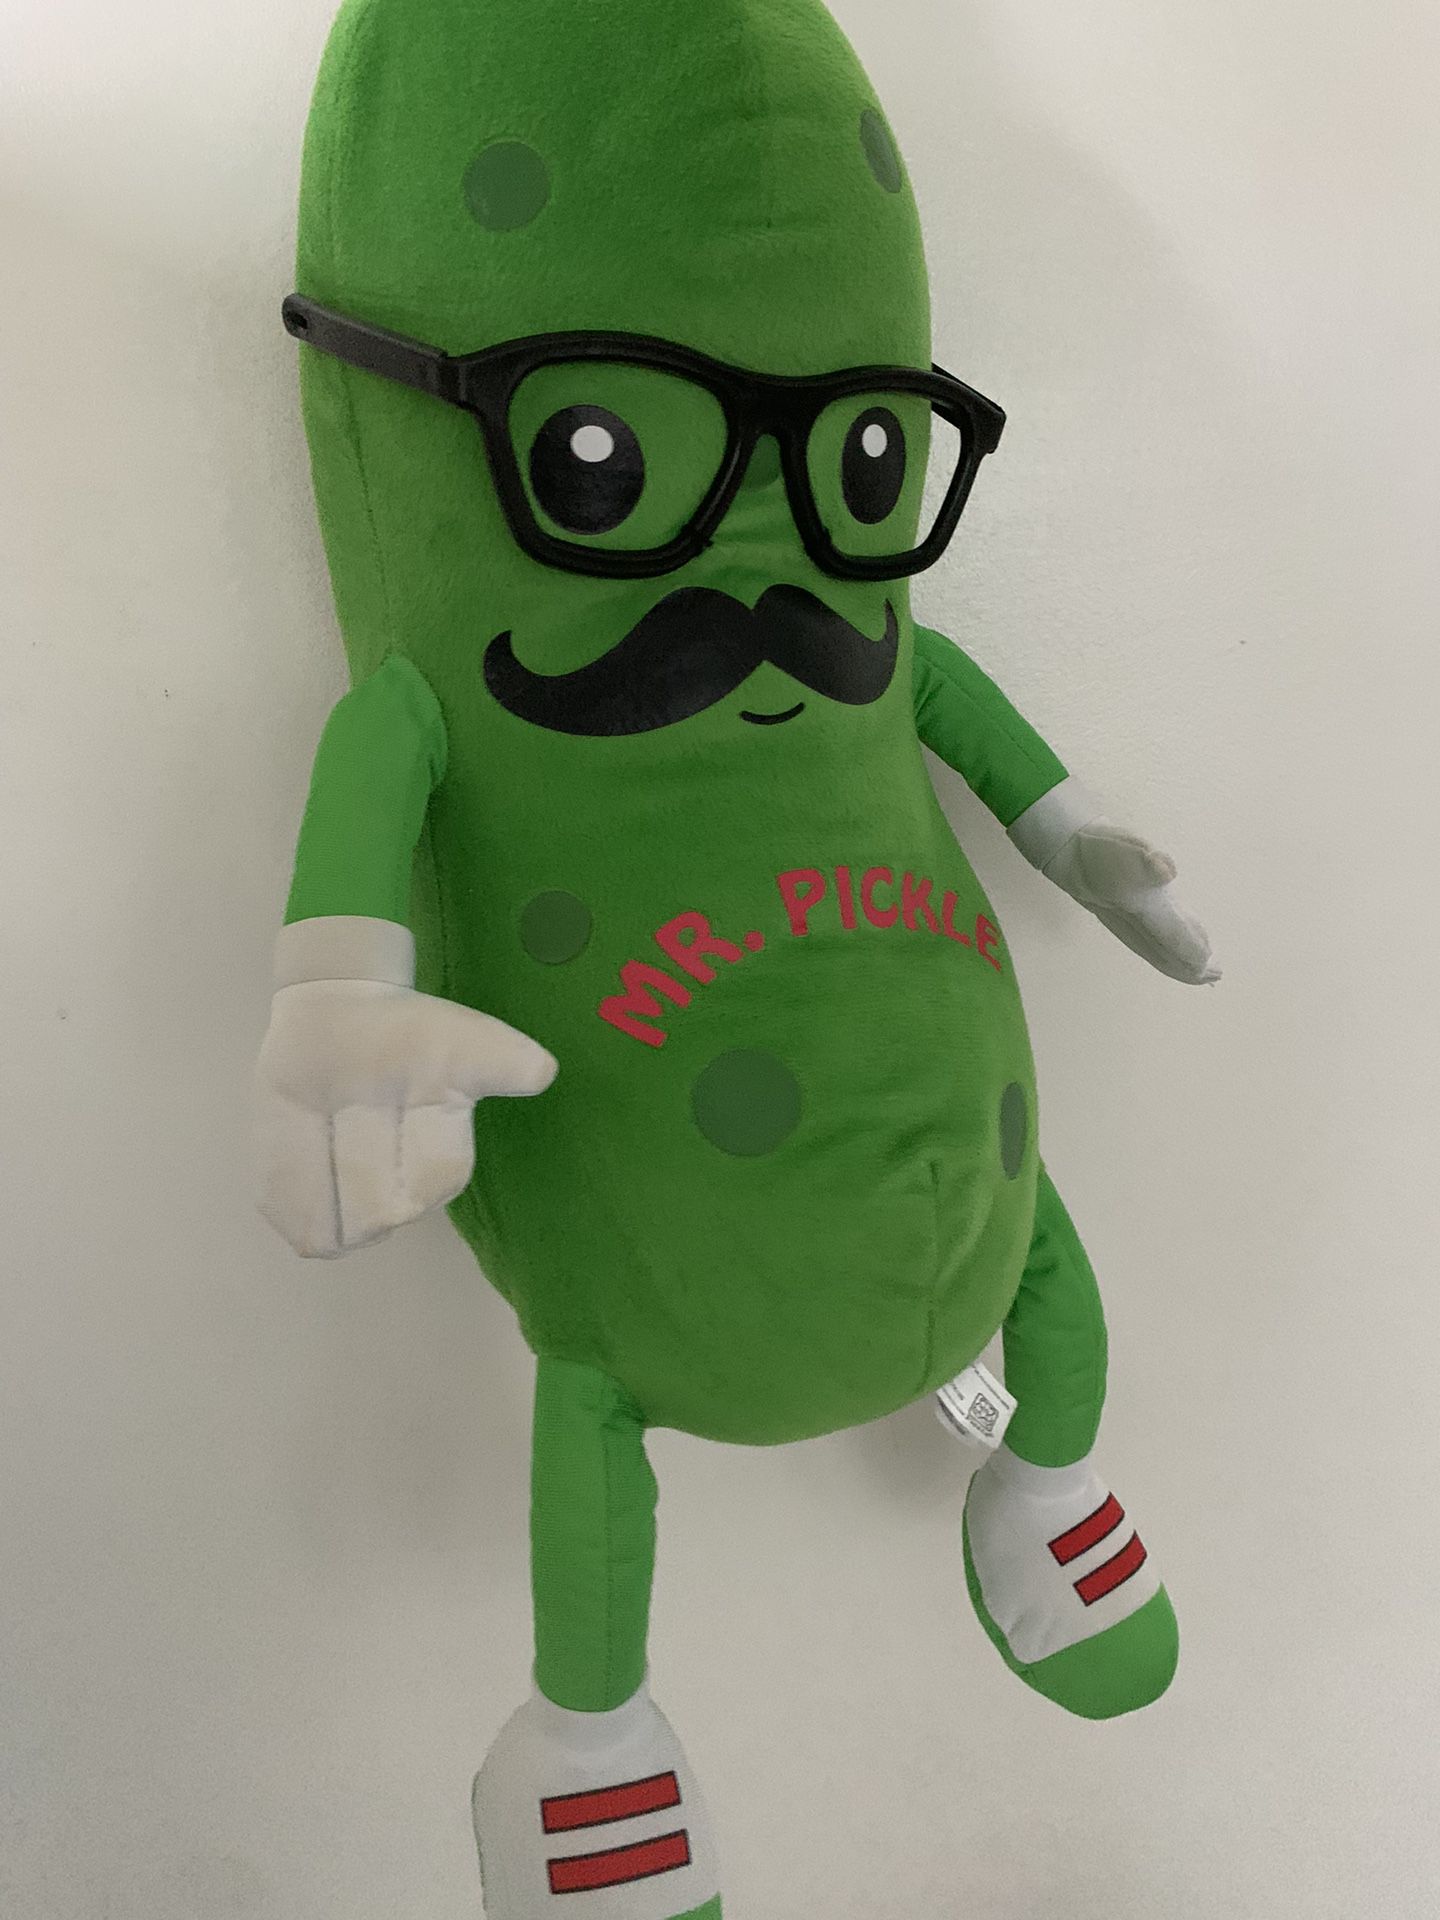 Fiesta Toy Mr. Pickle Plush Stuffed Animal Green 12in With Glasses And Mustache